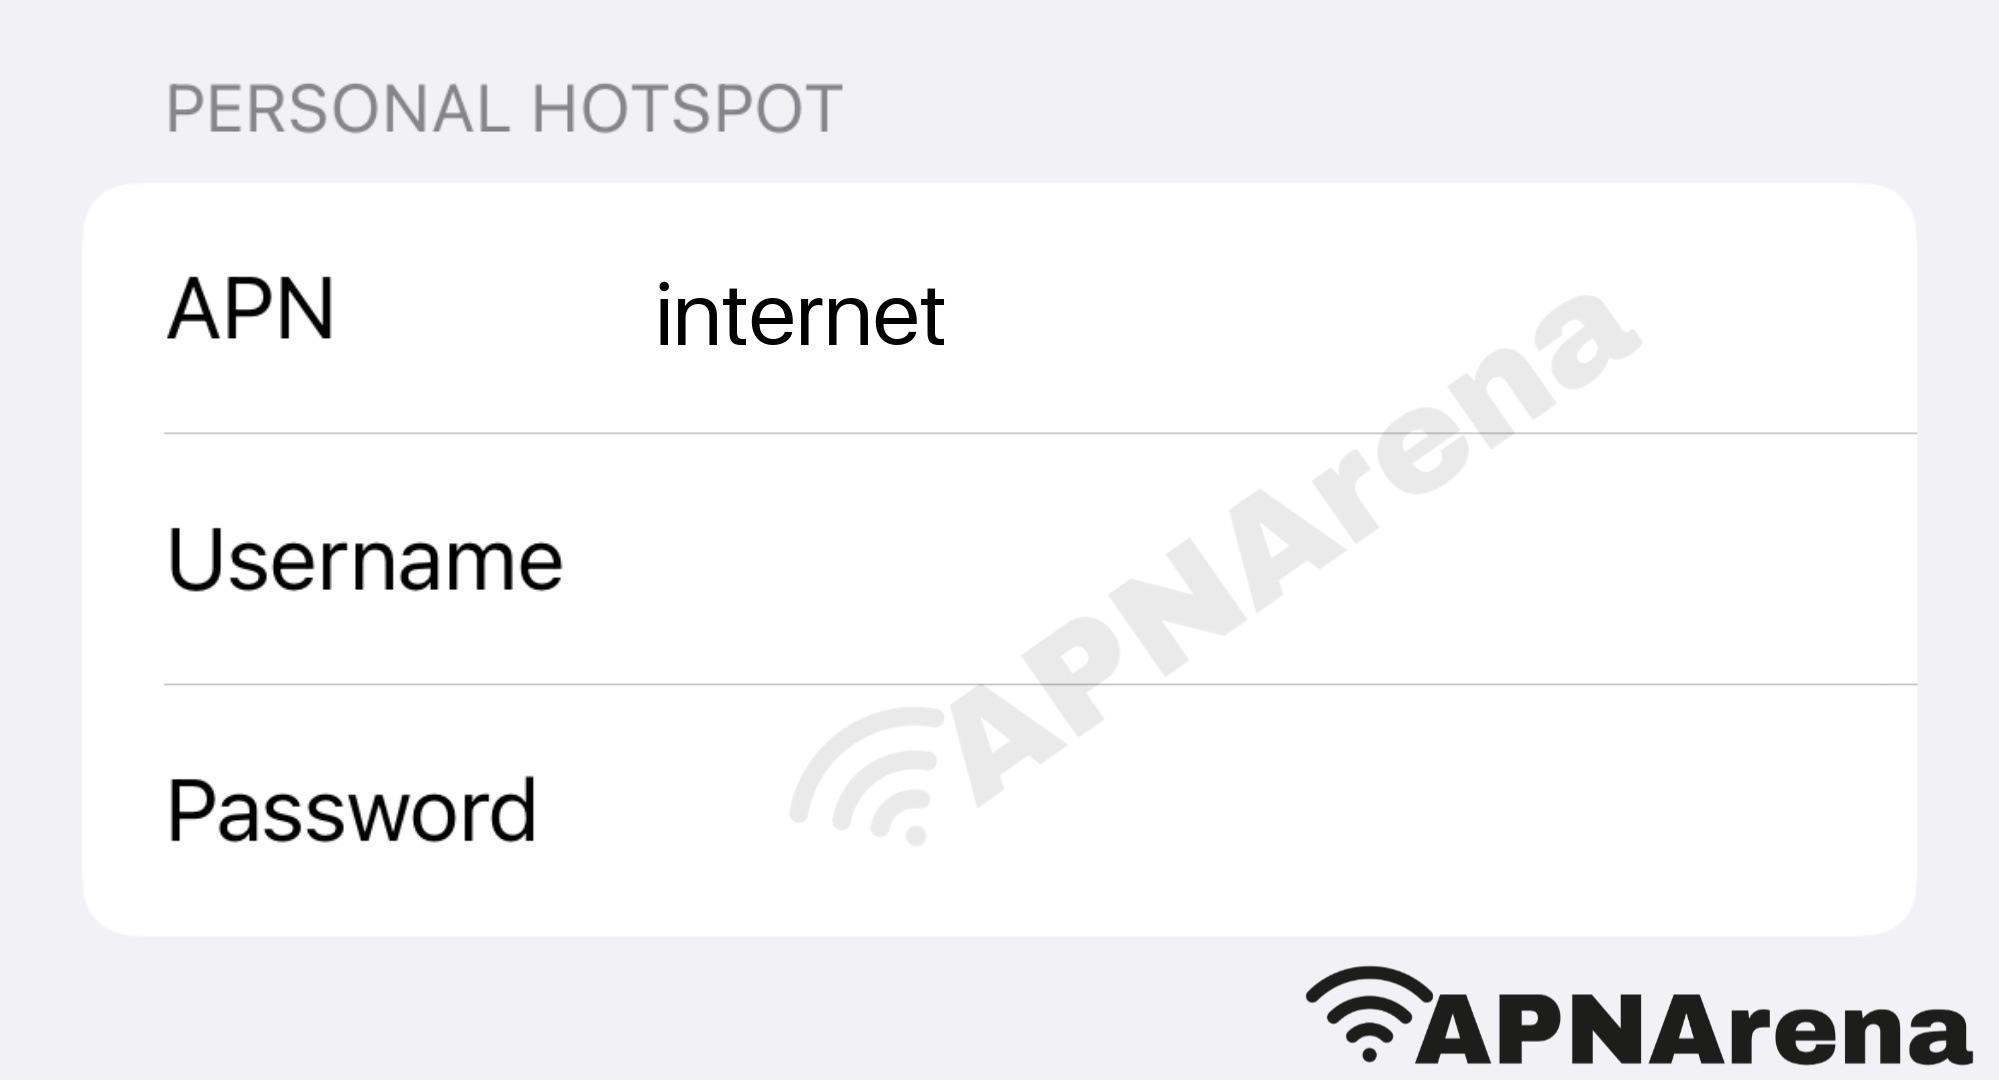 Cable & Wireless Seychelles Personal Hotspot Settings for iPhone